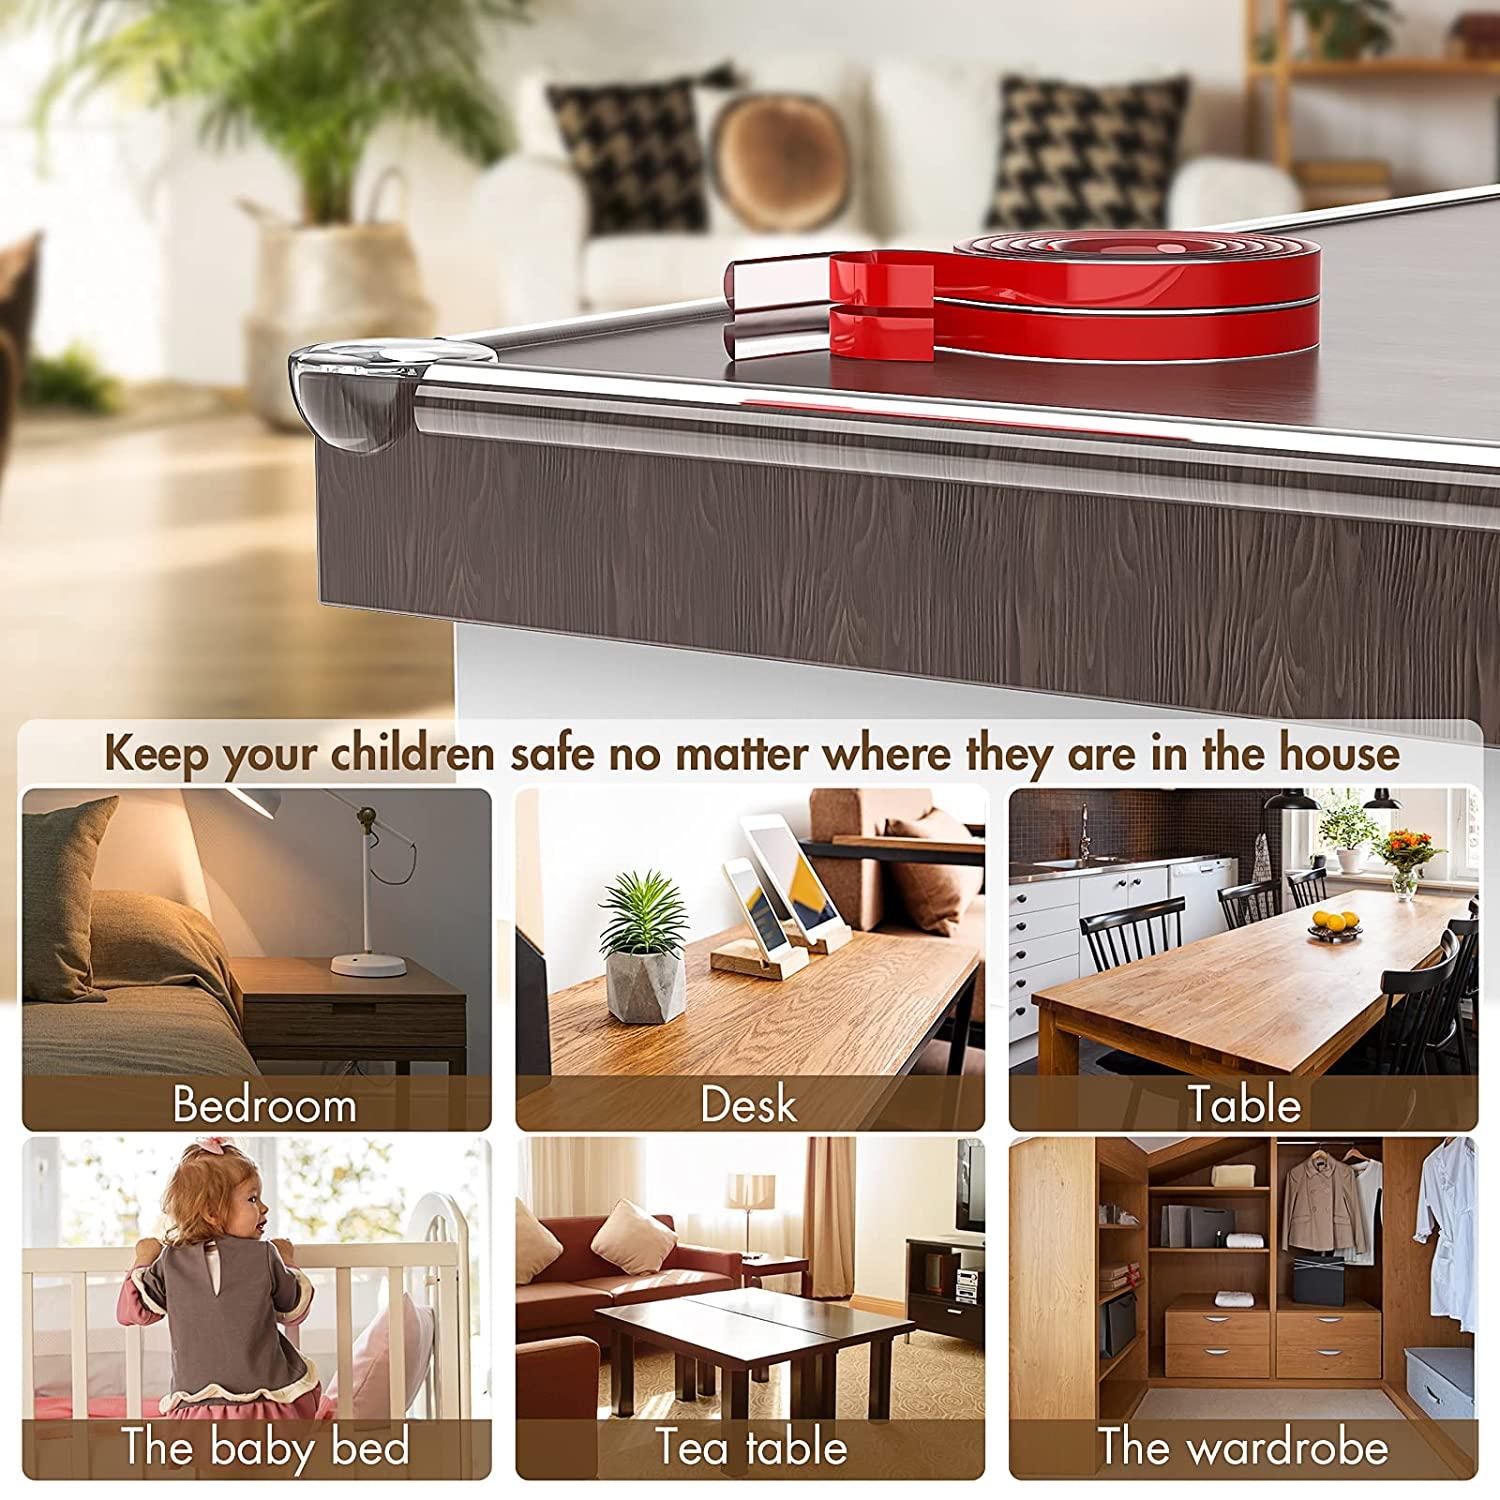 Corner Protector, Baby Proofing Table Corner Guards, Keep Child Safe,  Protectors